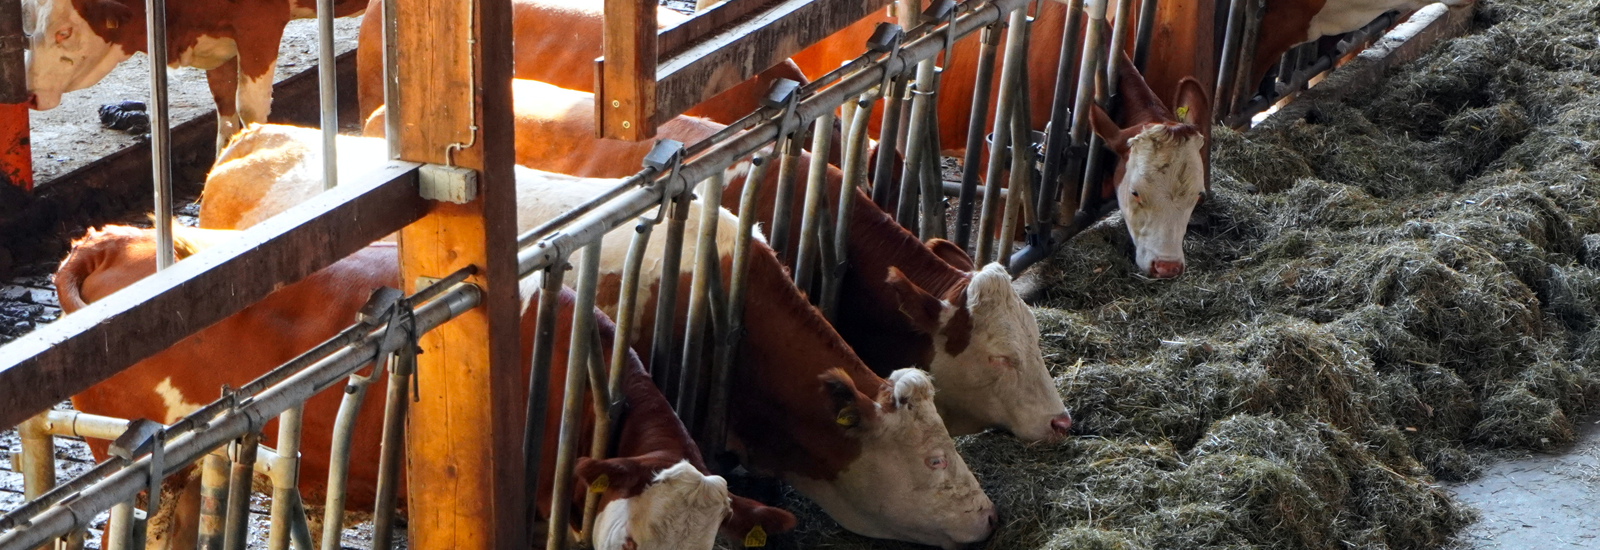 Photograph of cows restrained in a feeding apparatus at a factory farm